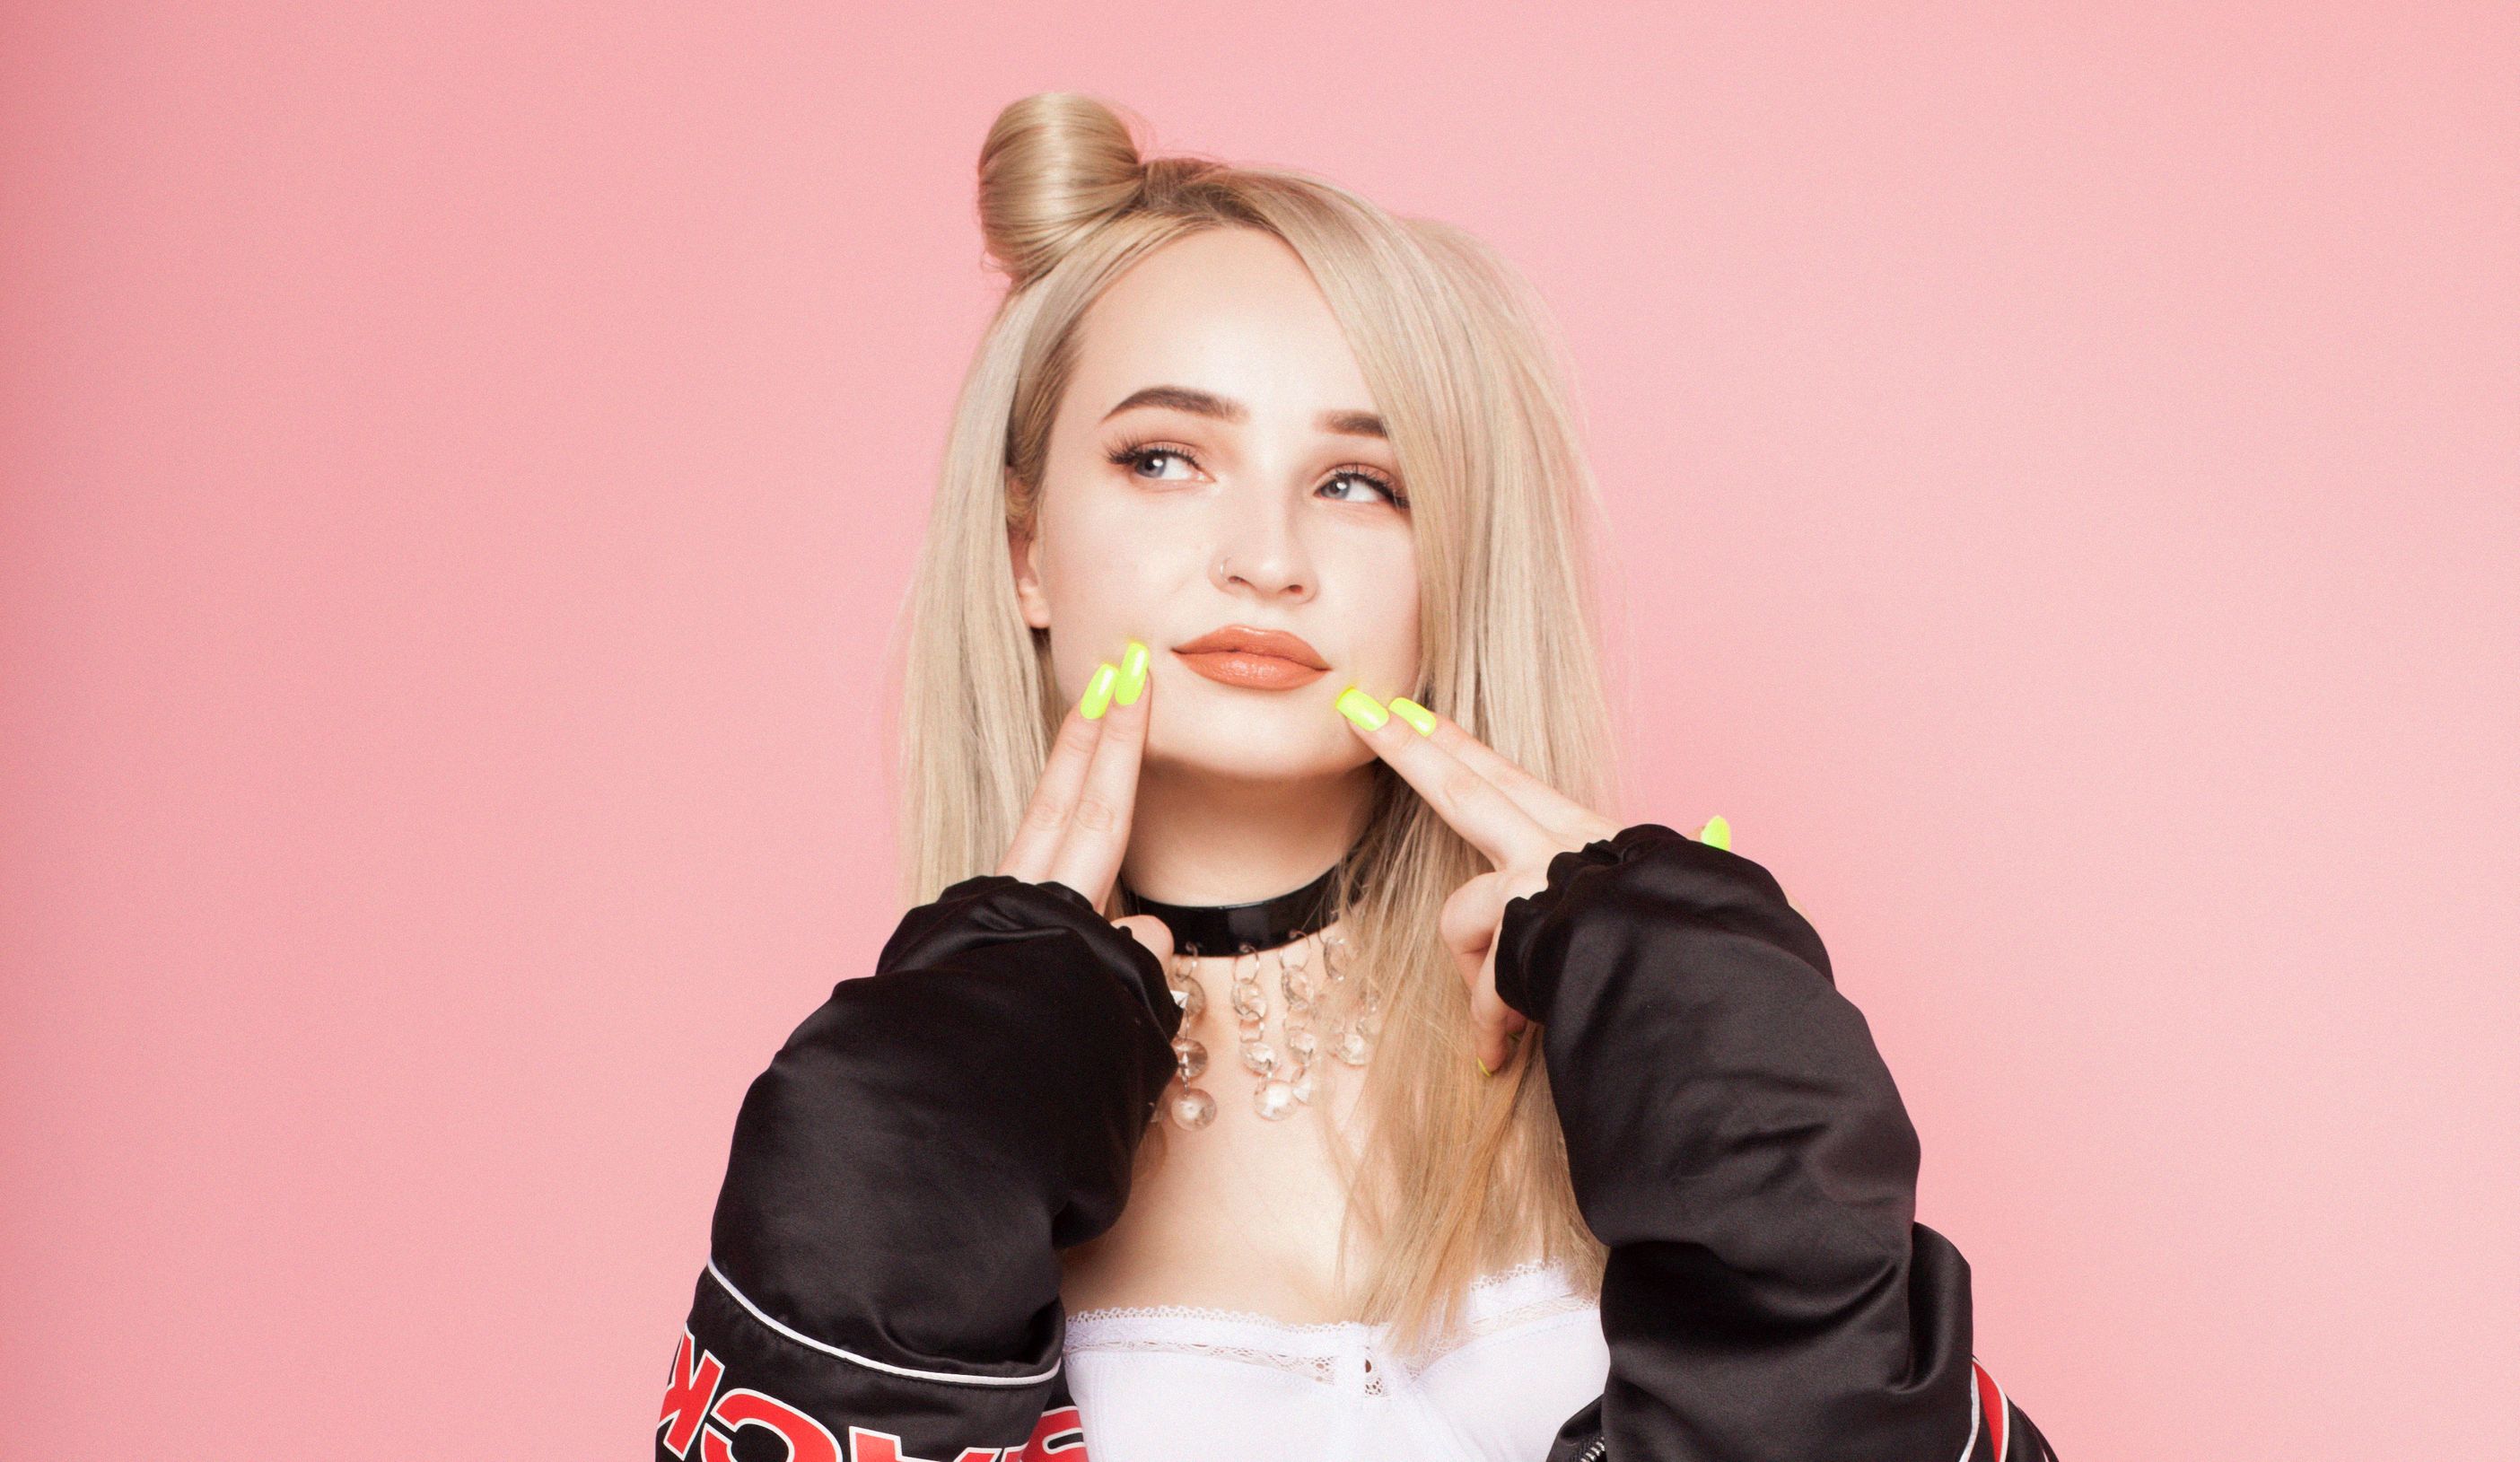 ‘That’s my sh*t’: Kim Petras on saving the next generation with pop music